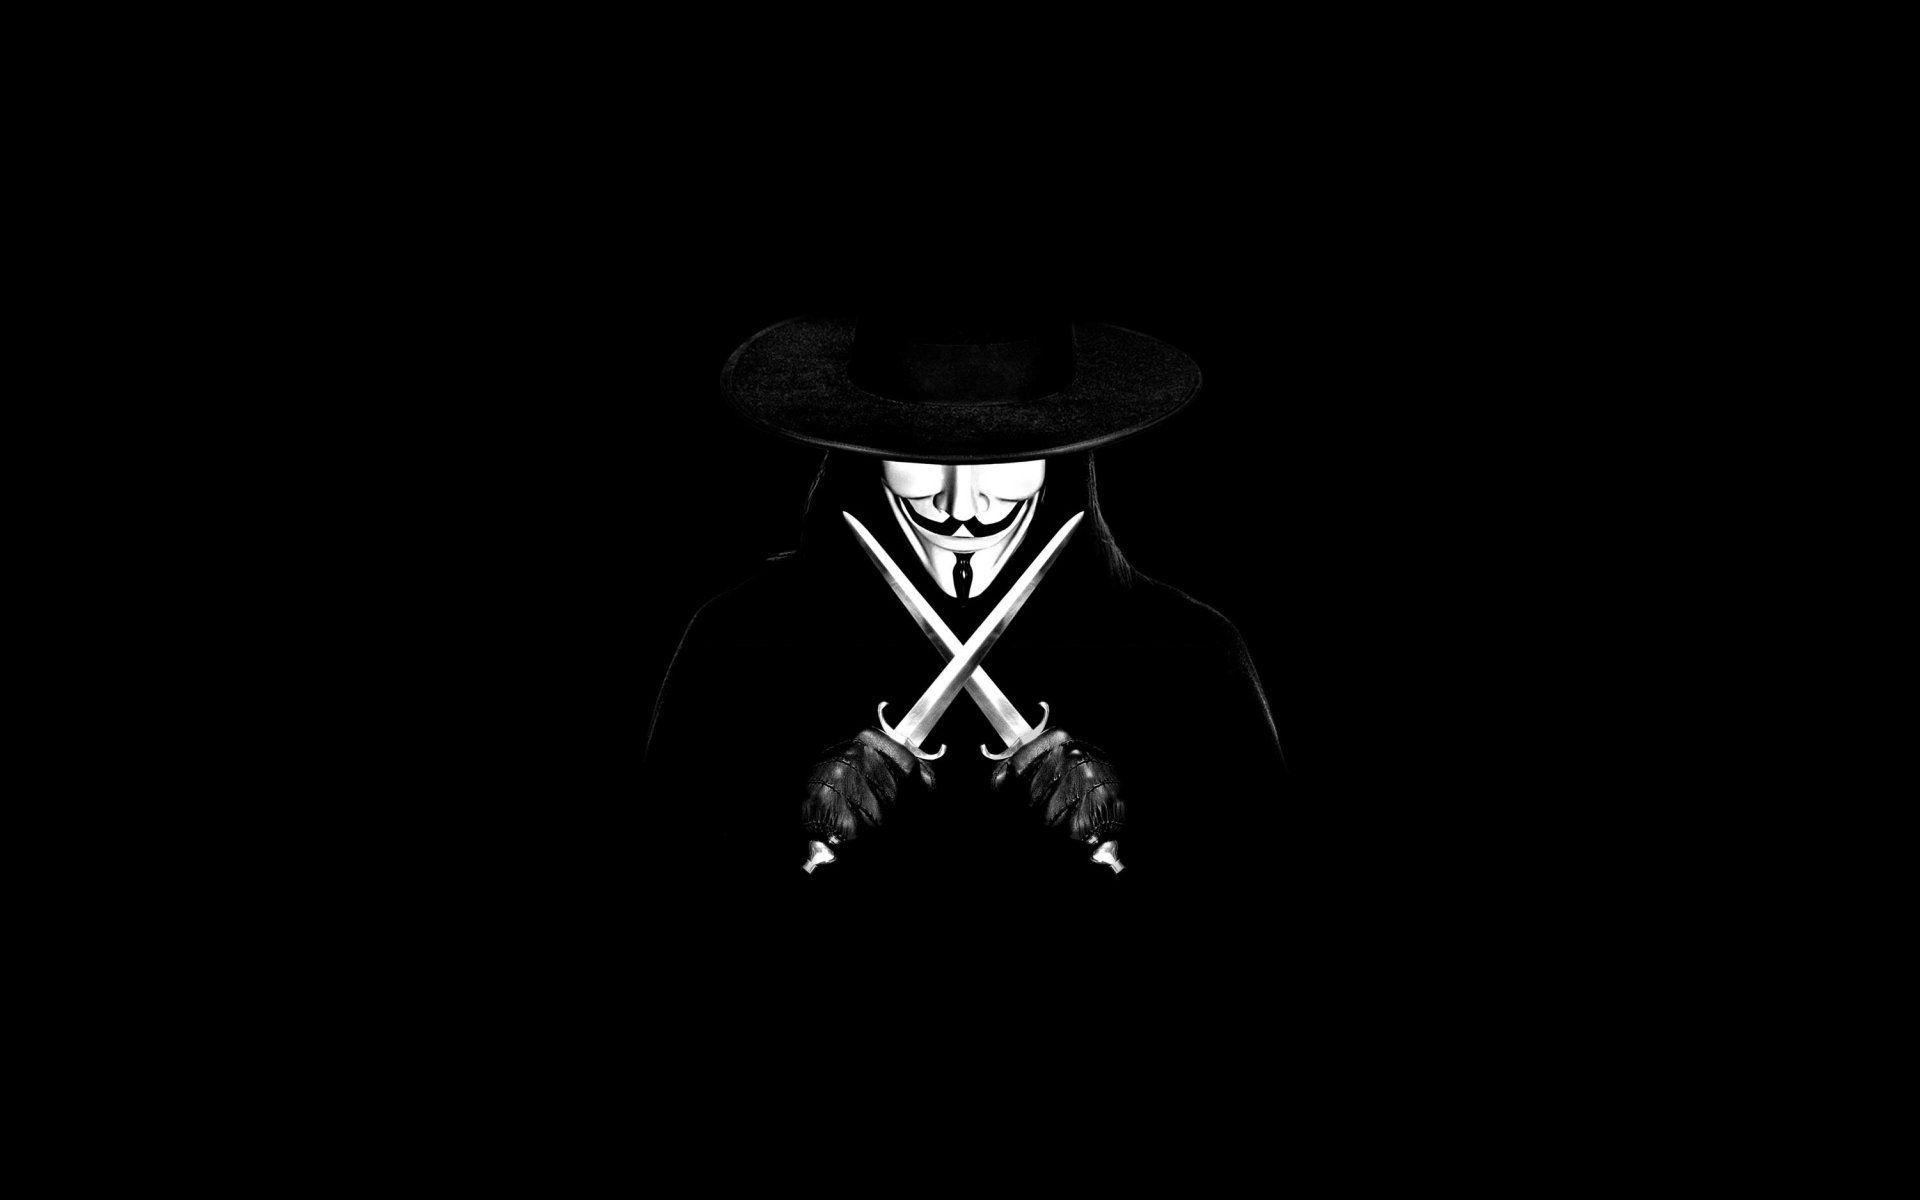 Anonymous movies masks guy fawkes v for vendetta swords black